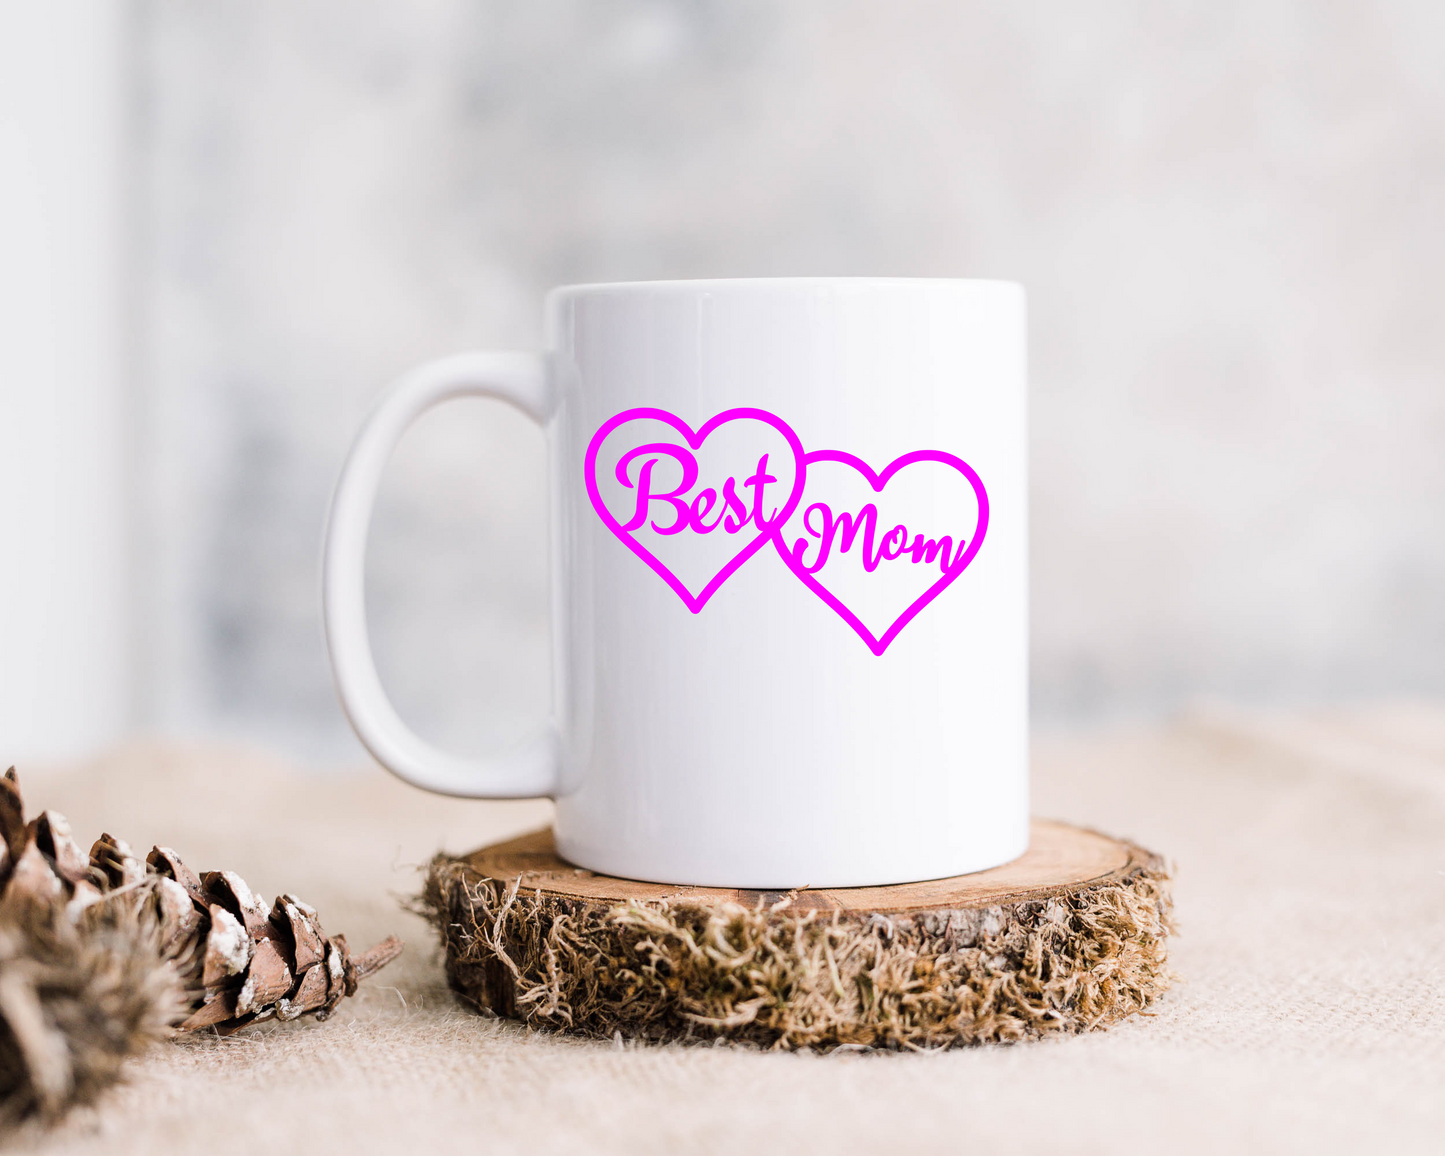 Best Mom Vinyl Decal, Heart Decal, Decal Gift for Mom,